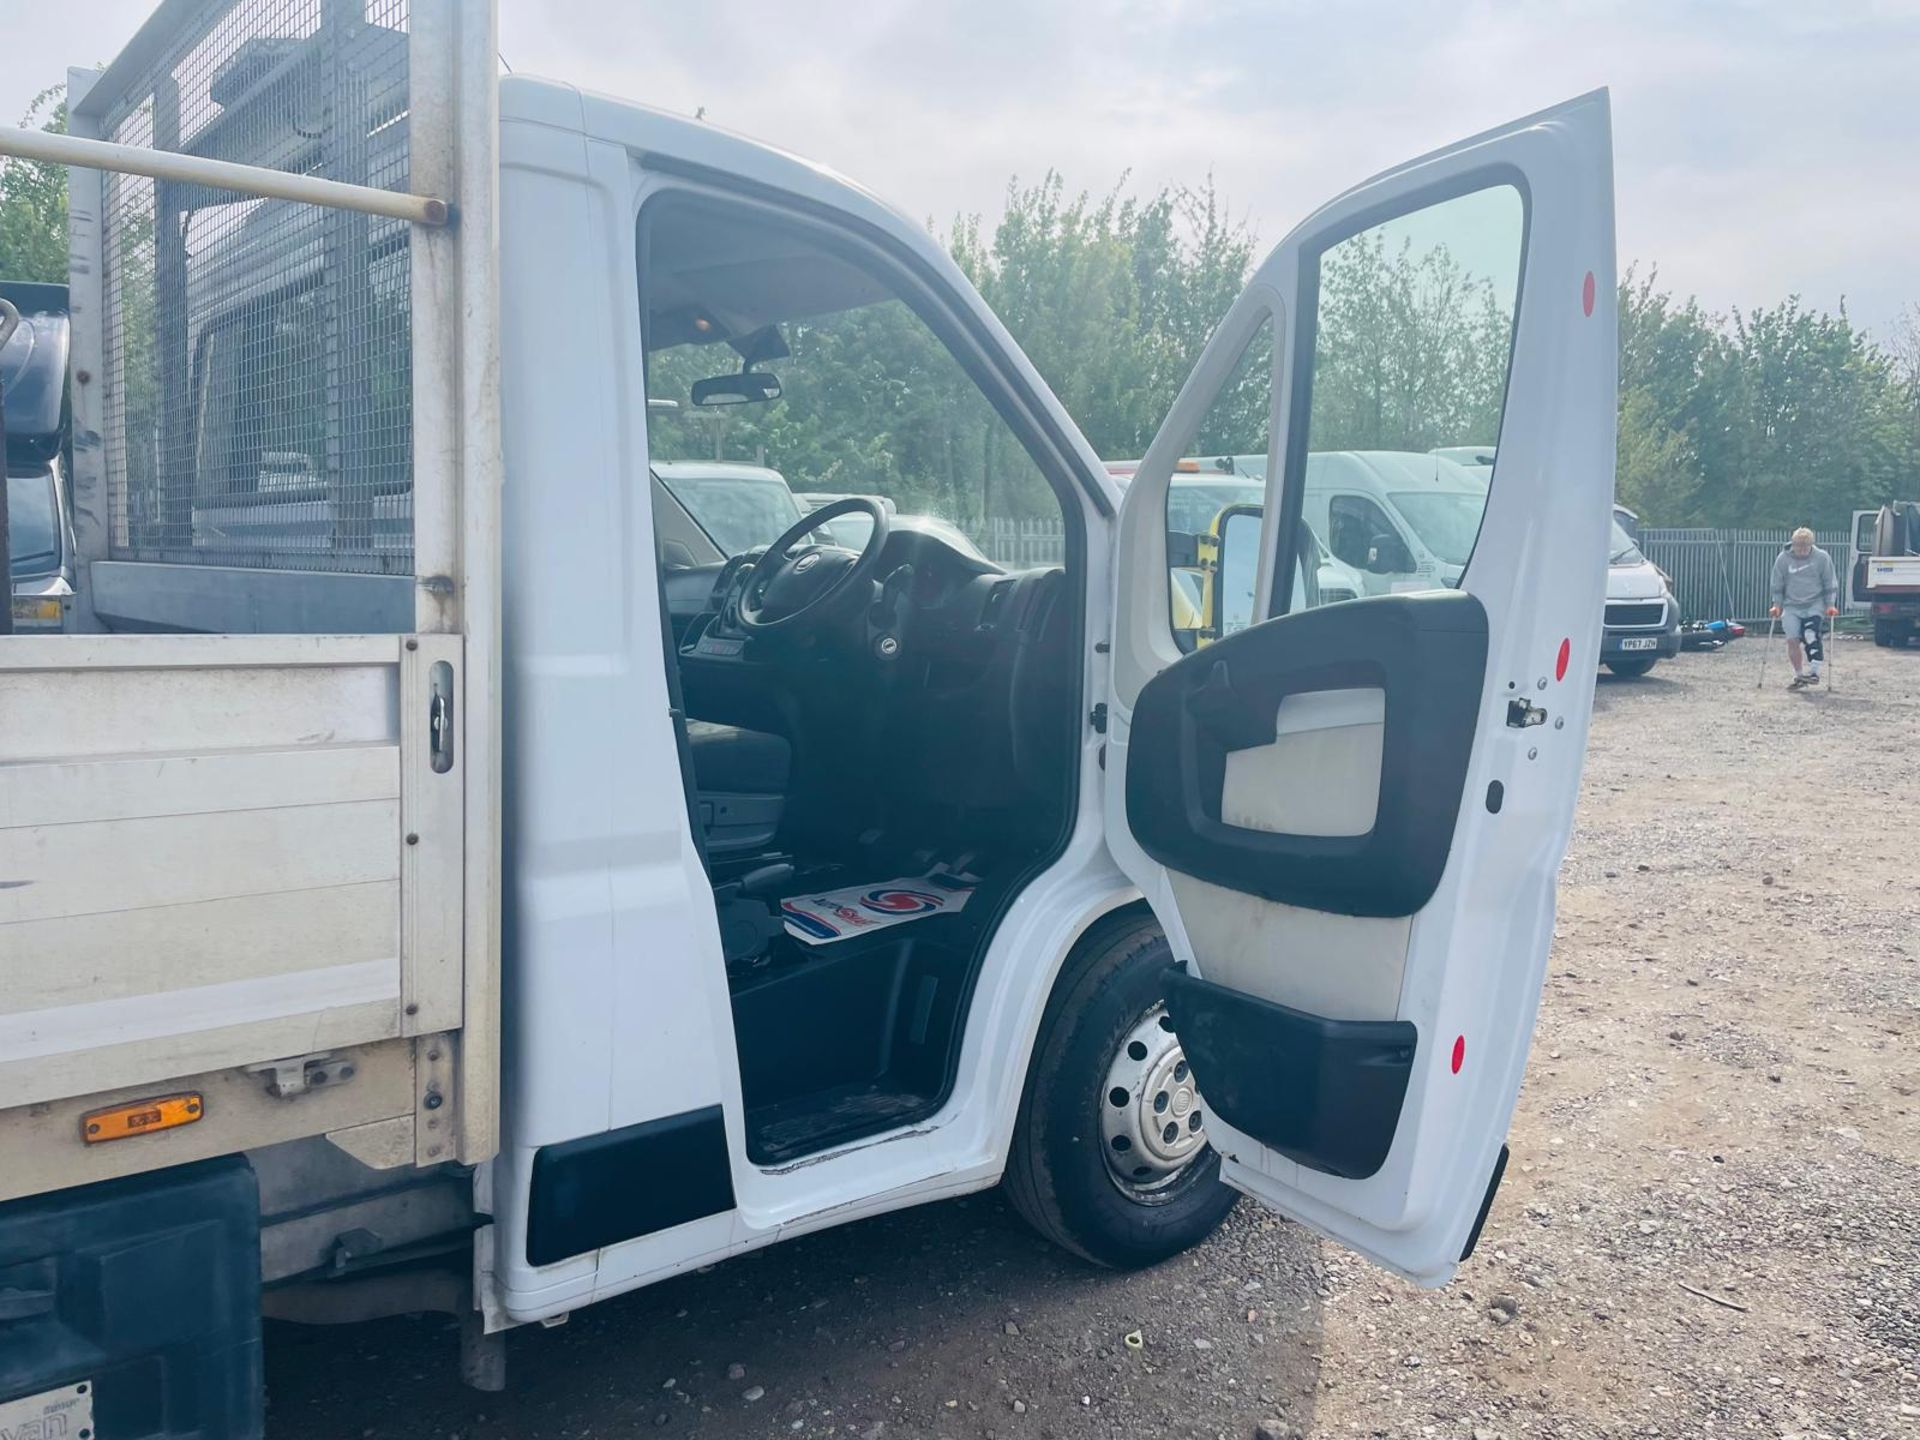 Fiat Ducato 35 Maxi 2.3 MultiJet 130 L3H1 Dropside 2019 '69 Reg'-1 Former keepers - Only 76,029 - Image 14 of 27